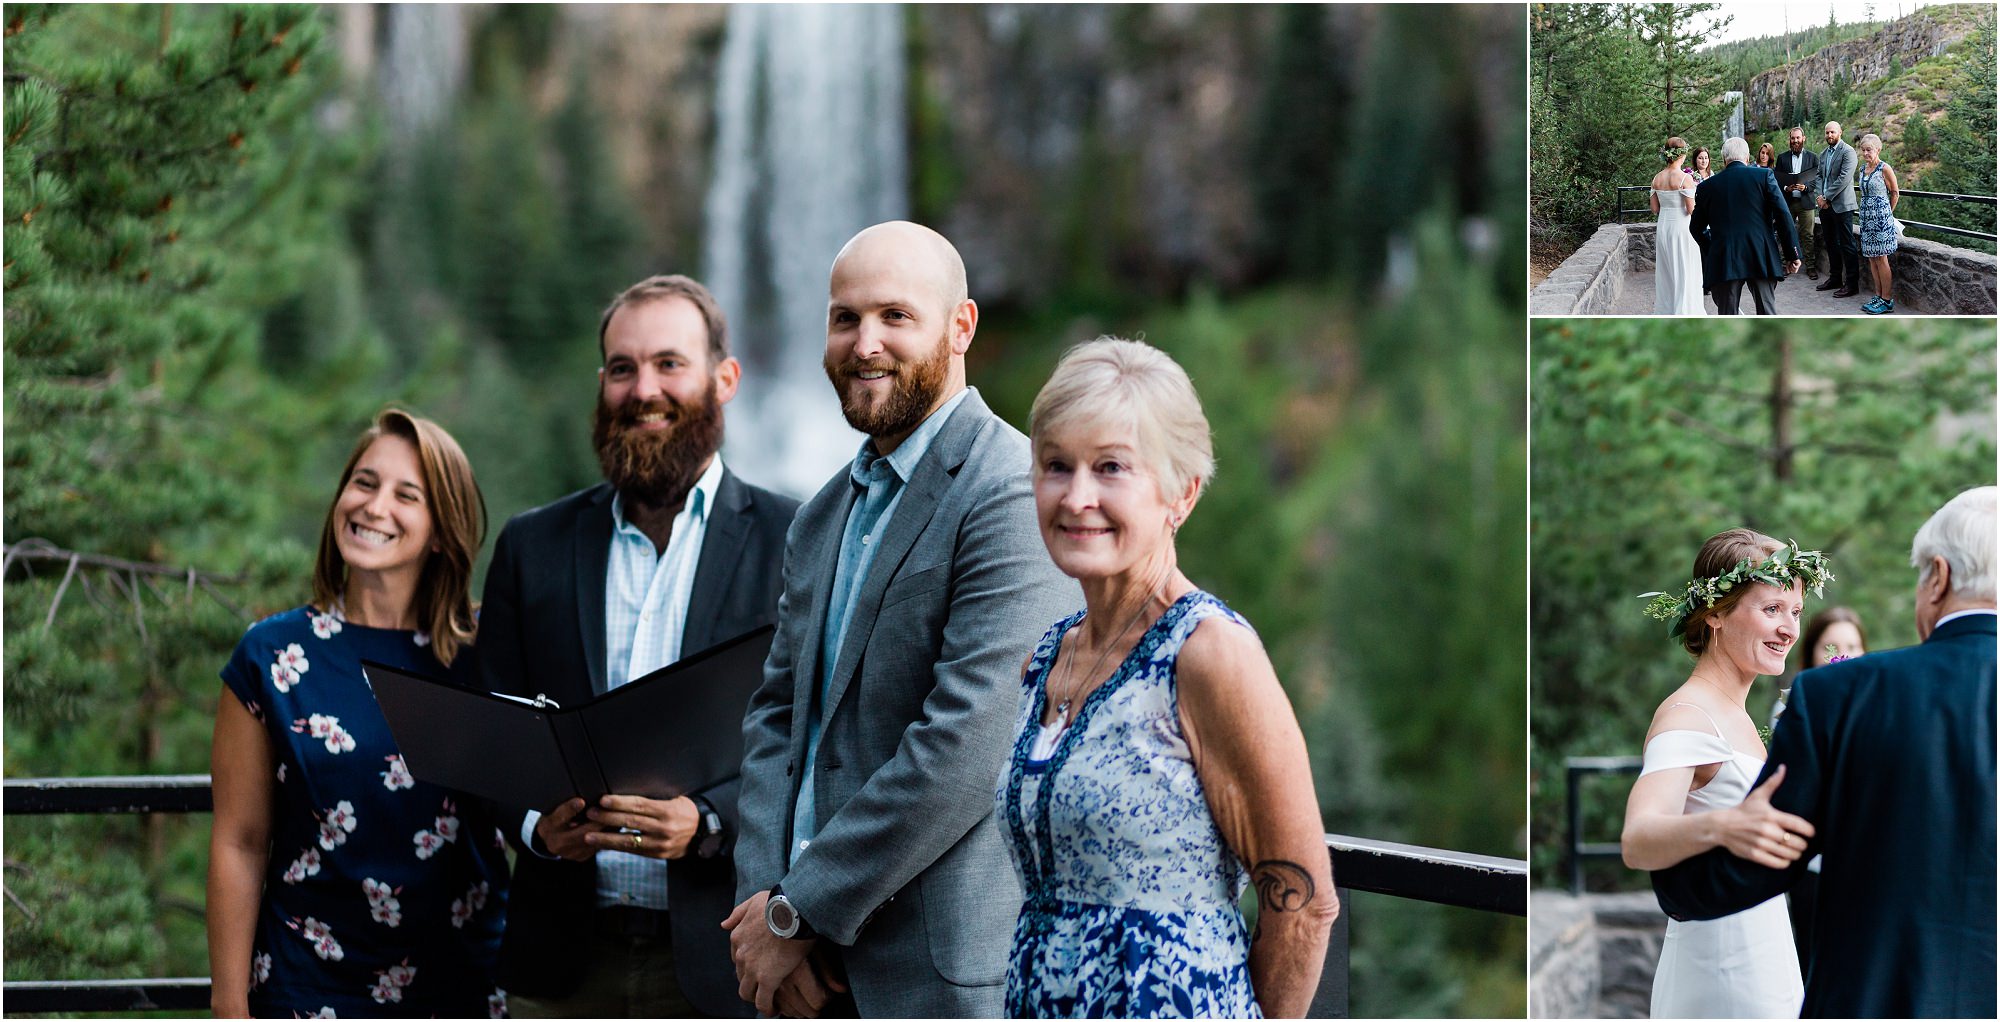 A smiling groom and a small gathering of guests watch as the bride's dad escorts her down the aisle towards the ceremony with a view of a cascading waterfall in Bend, Oregon. | Erica Swantek Photography